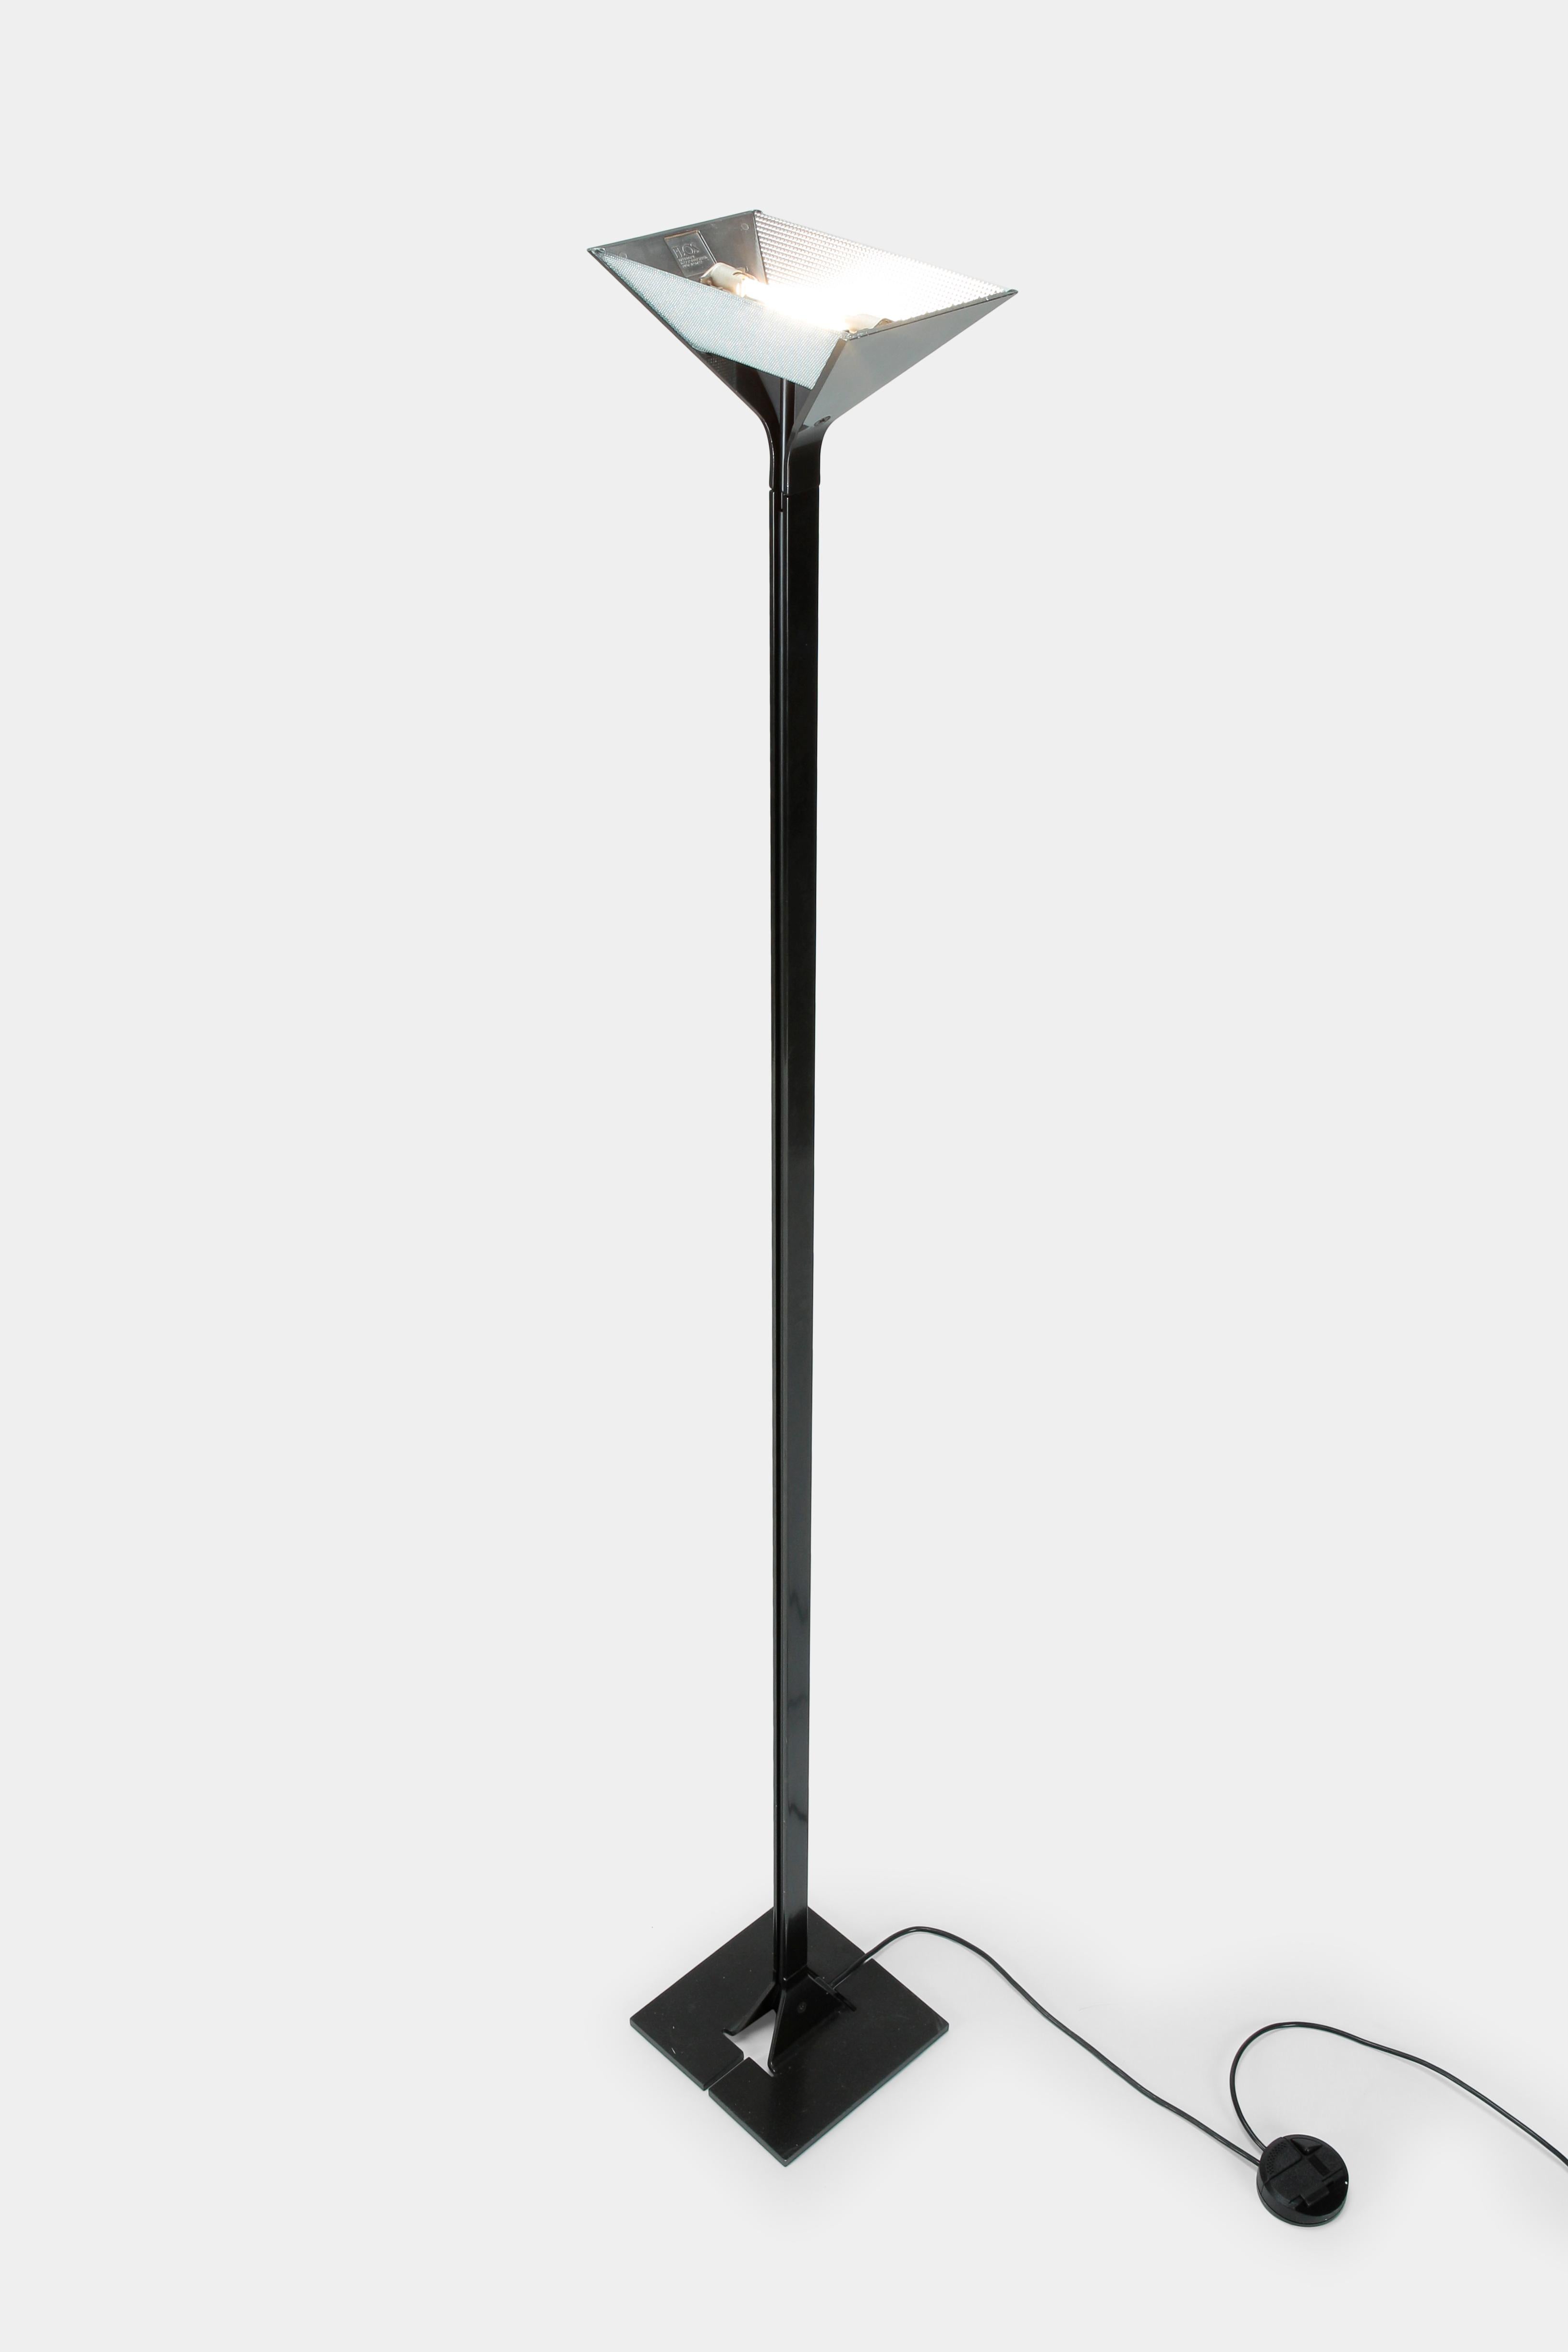 Description
Afra & Tobia Scarpa “Papillona” floor lamp manufactured by Flos in the 1970s in Italy. Minimalist uplight made of black lacquered aluminum. Foot switch with dimmer.